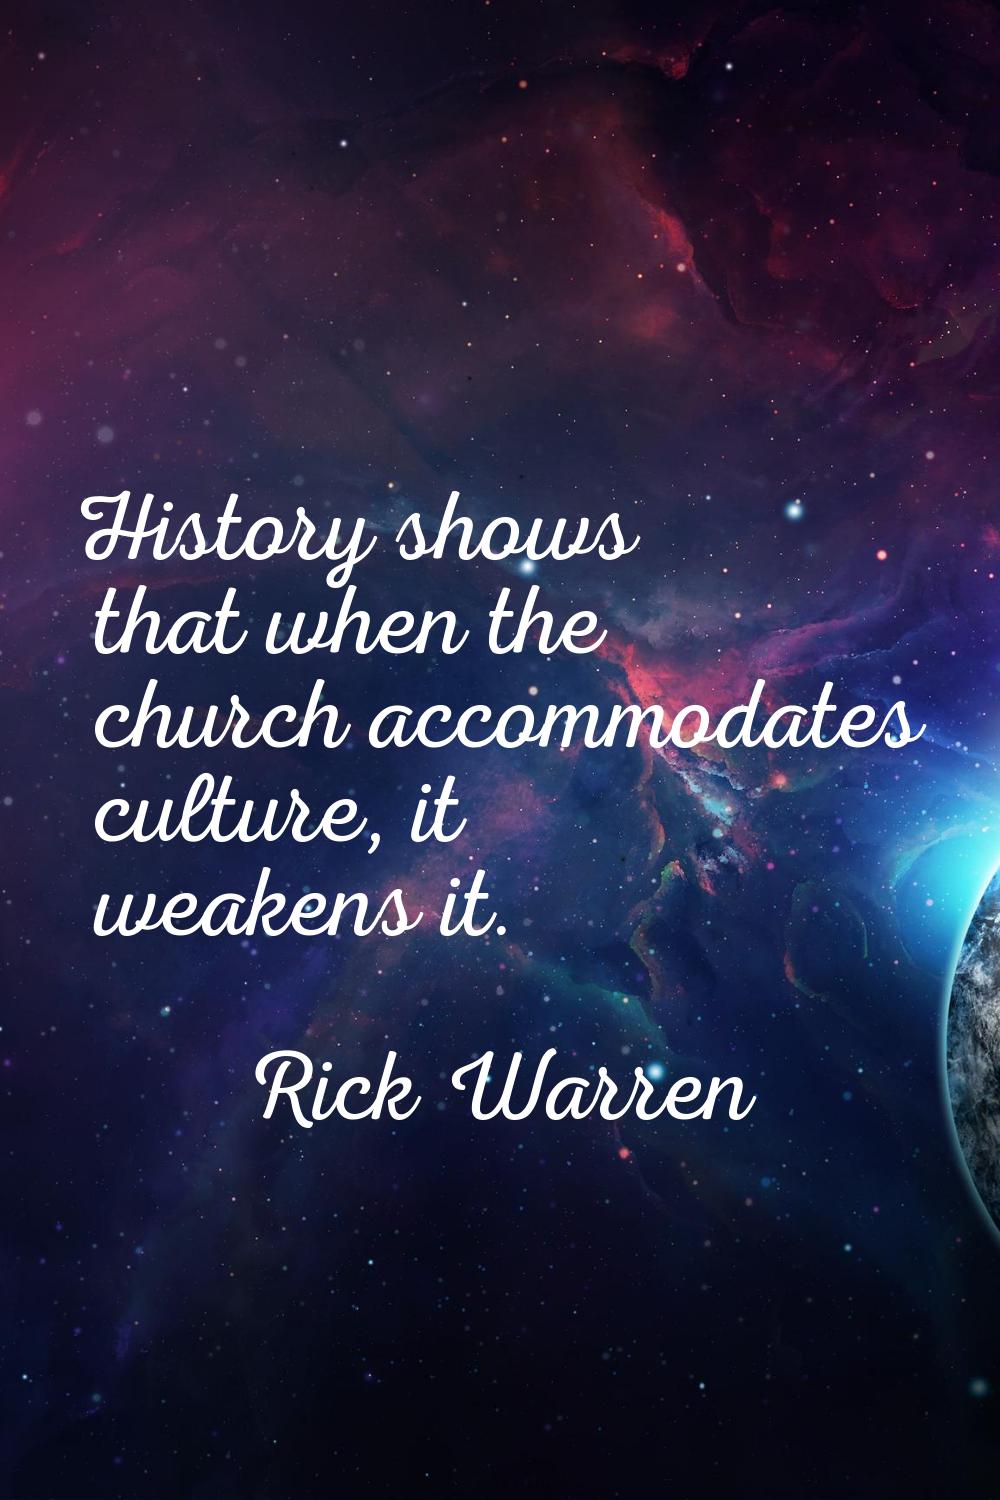 History shows that when the church accommodates culture, it weakens it.